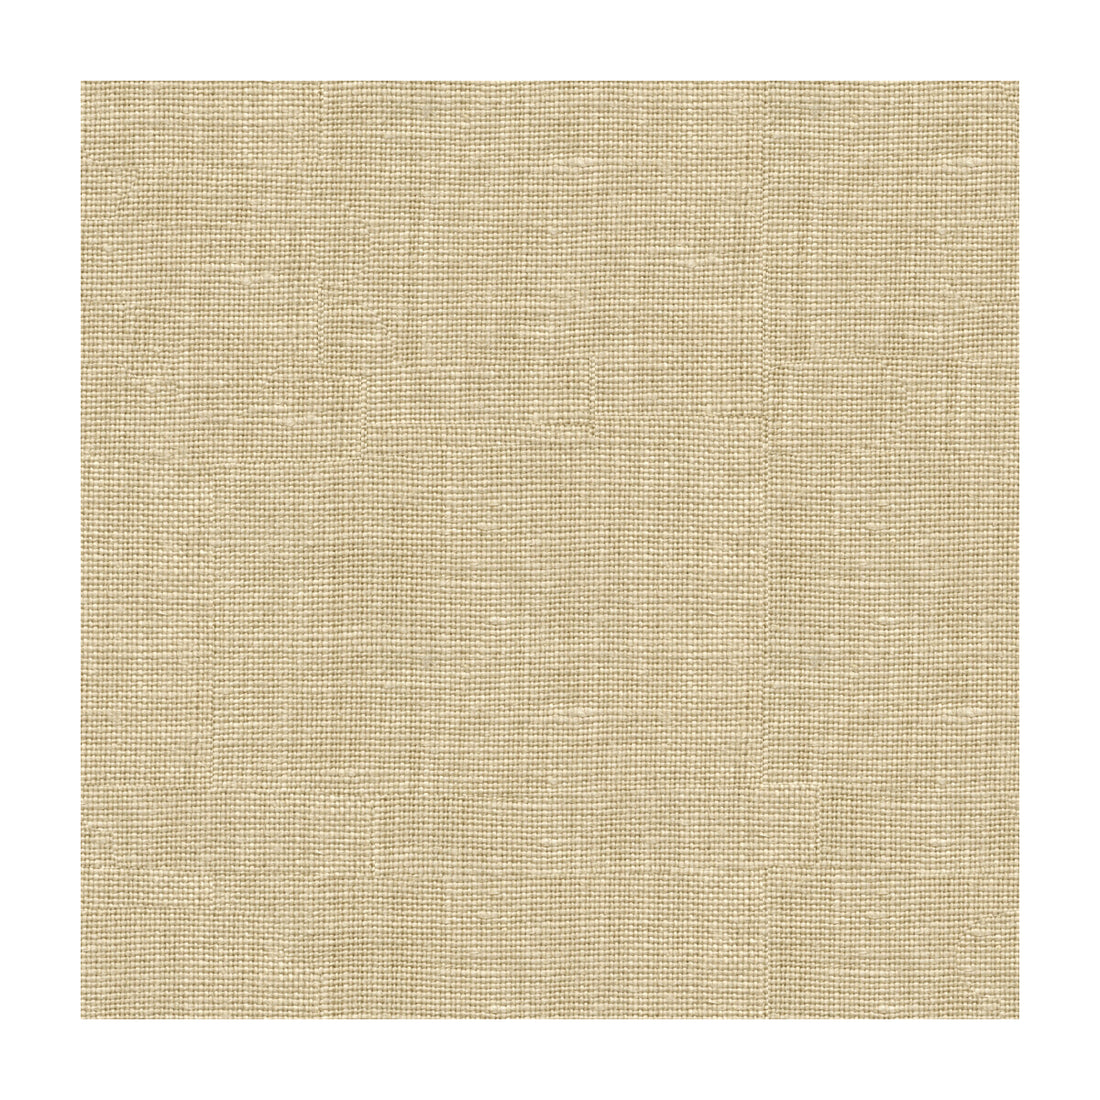 Kravet Basics fabric in 33767-116 color - pattern 33767.116.0 - by Kravet Basics in the Perfect Plains collection